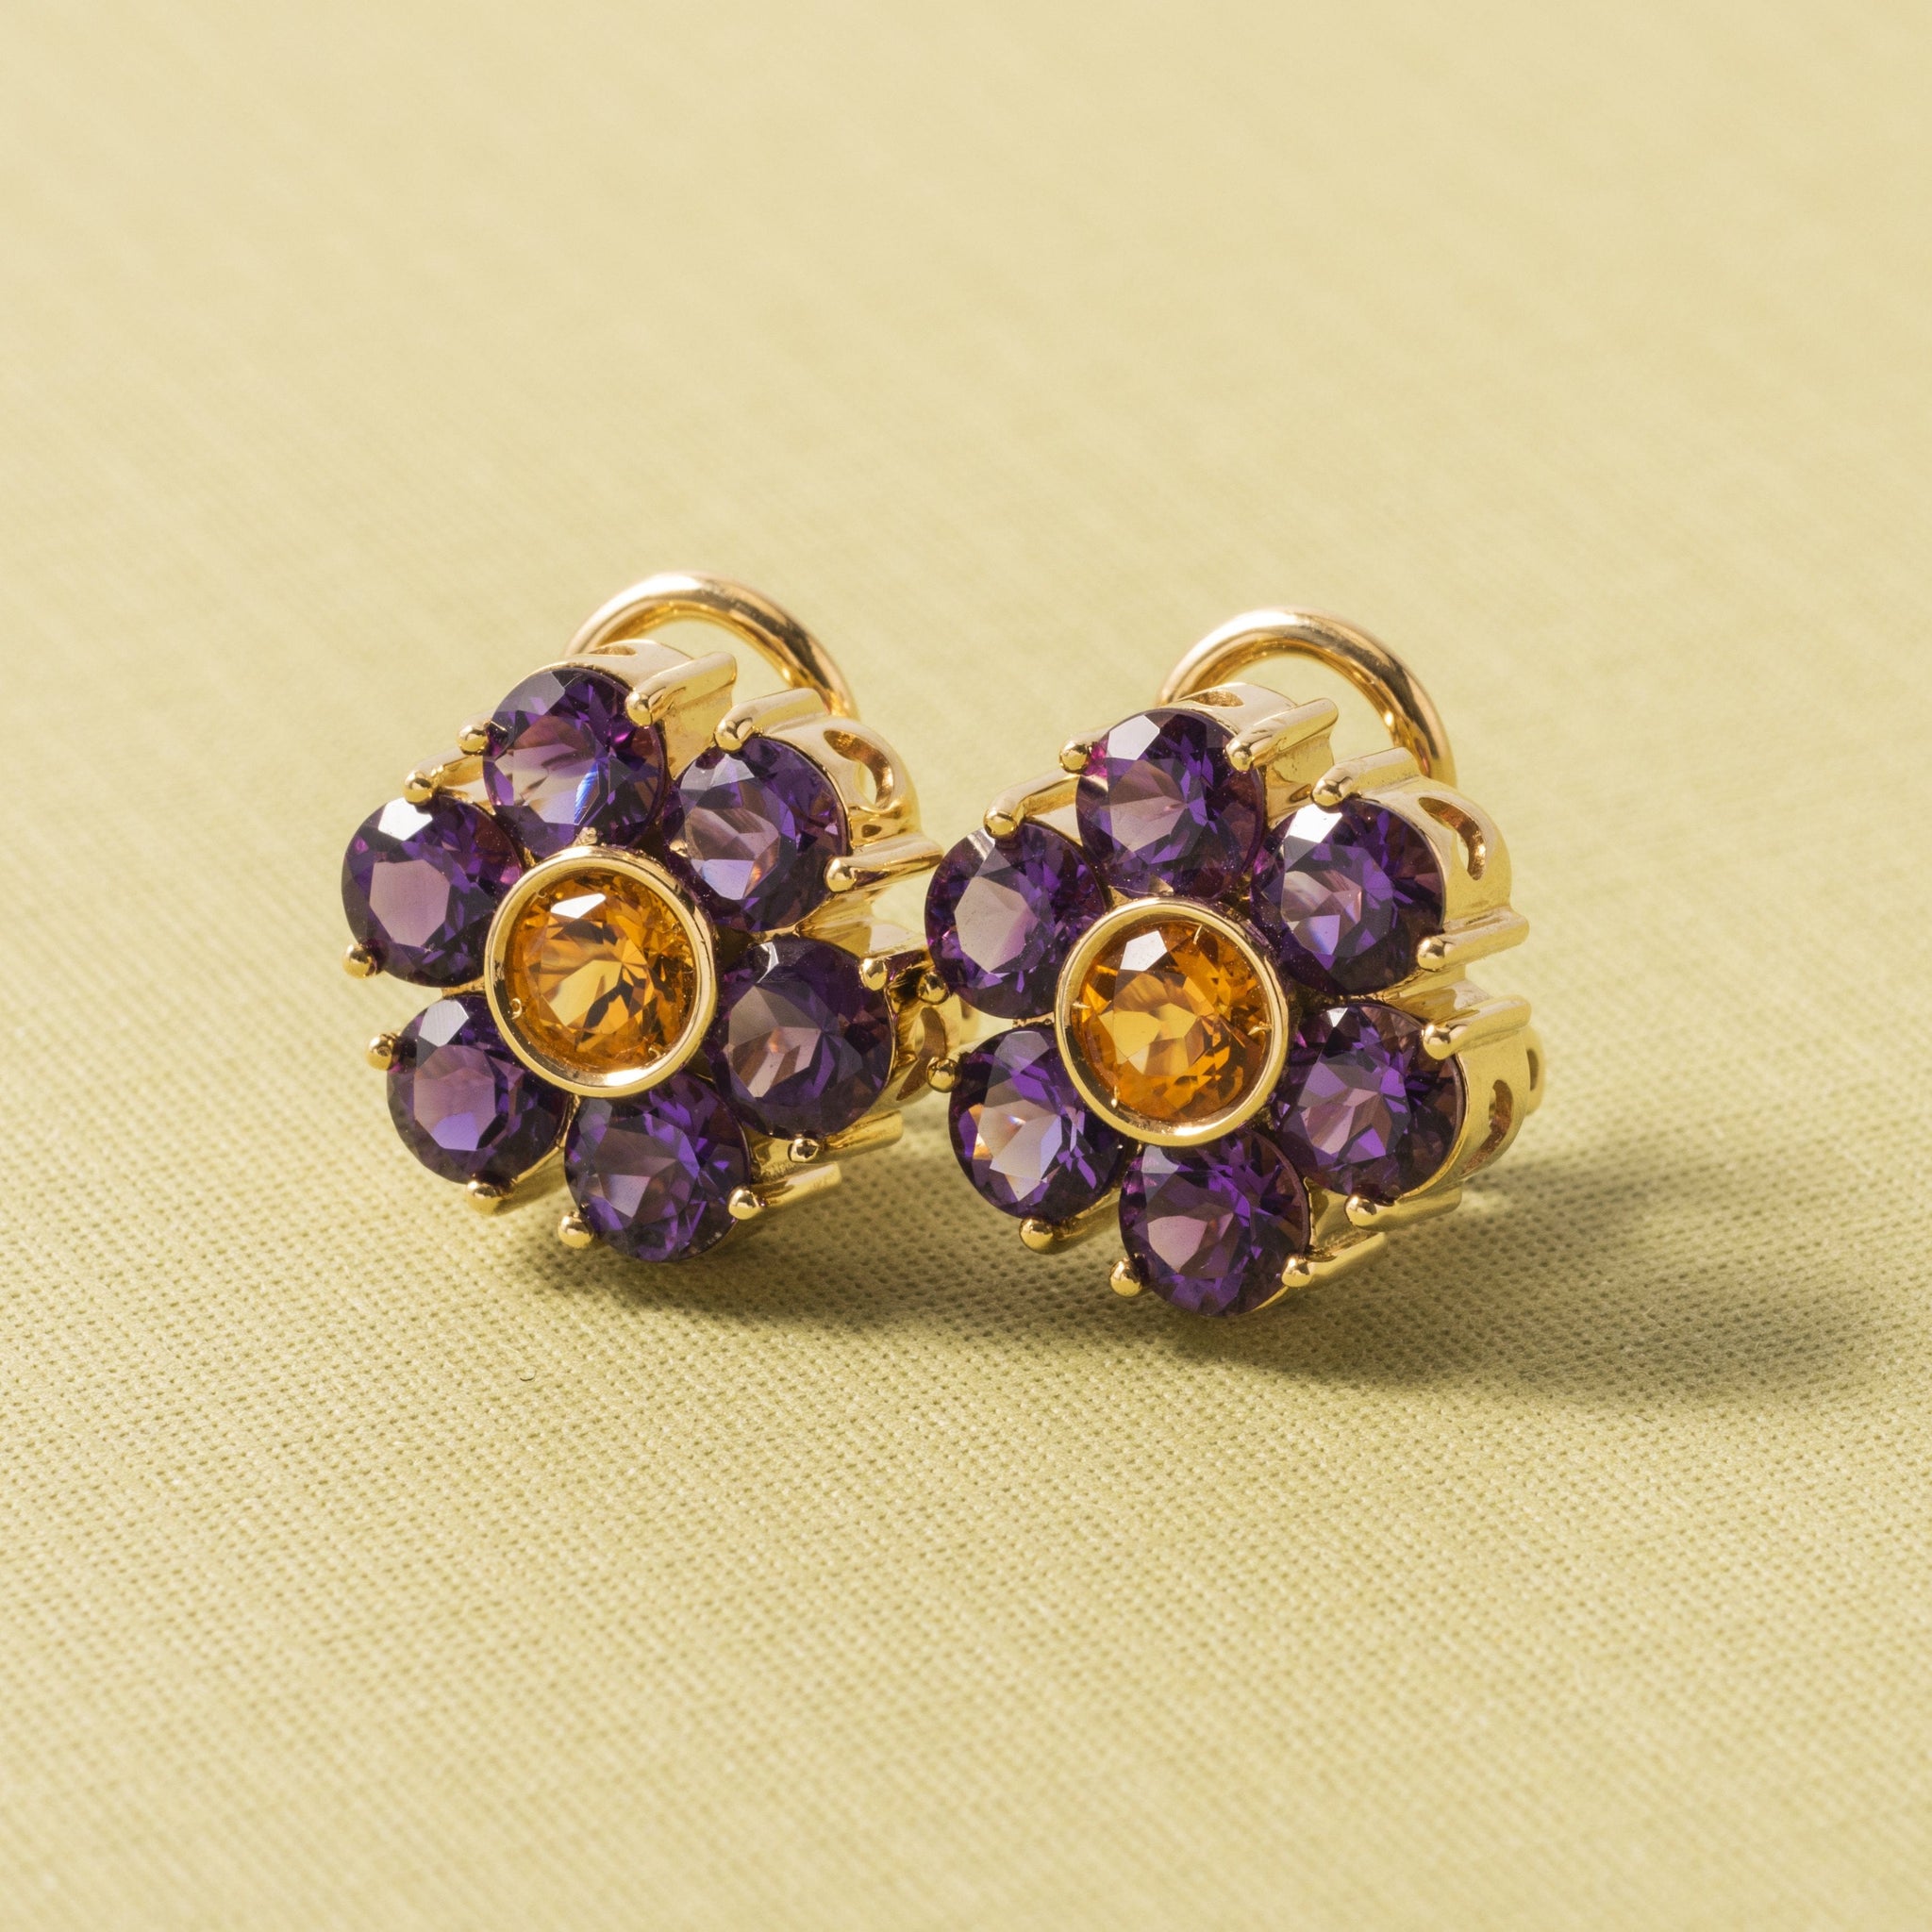 Pasquale Bruni 18K Yellow Gold Estate Amethyst and Citrine Flower Earrings